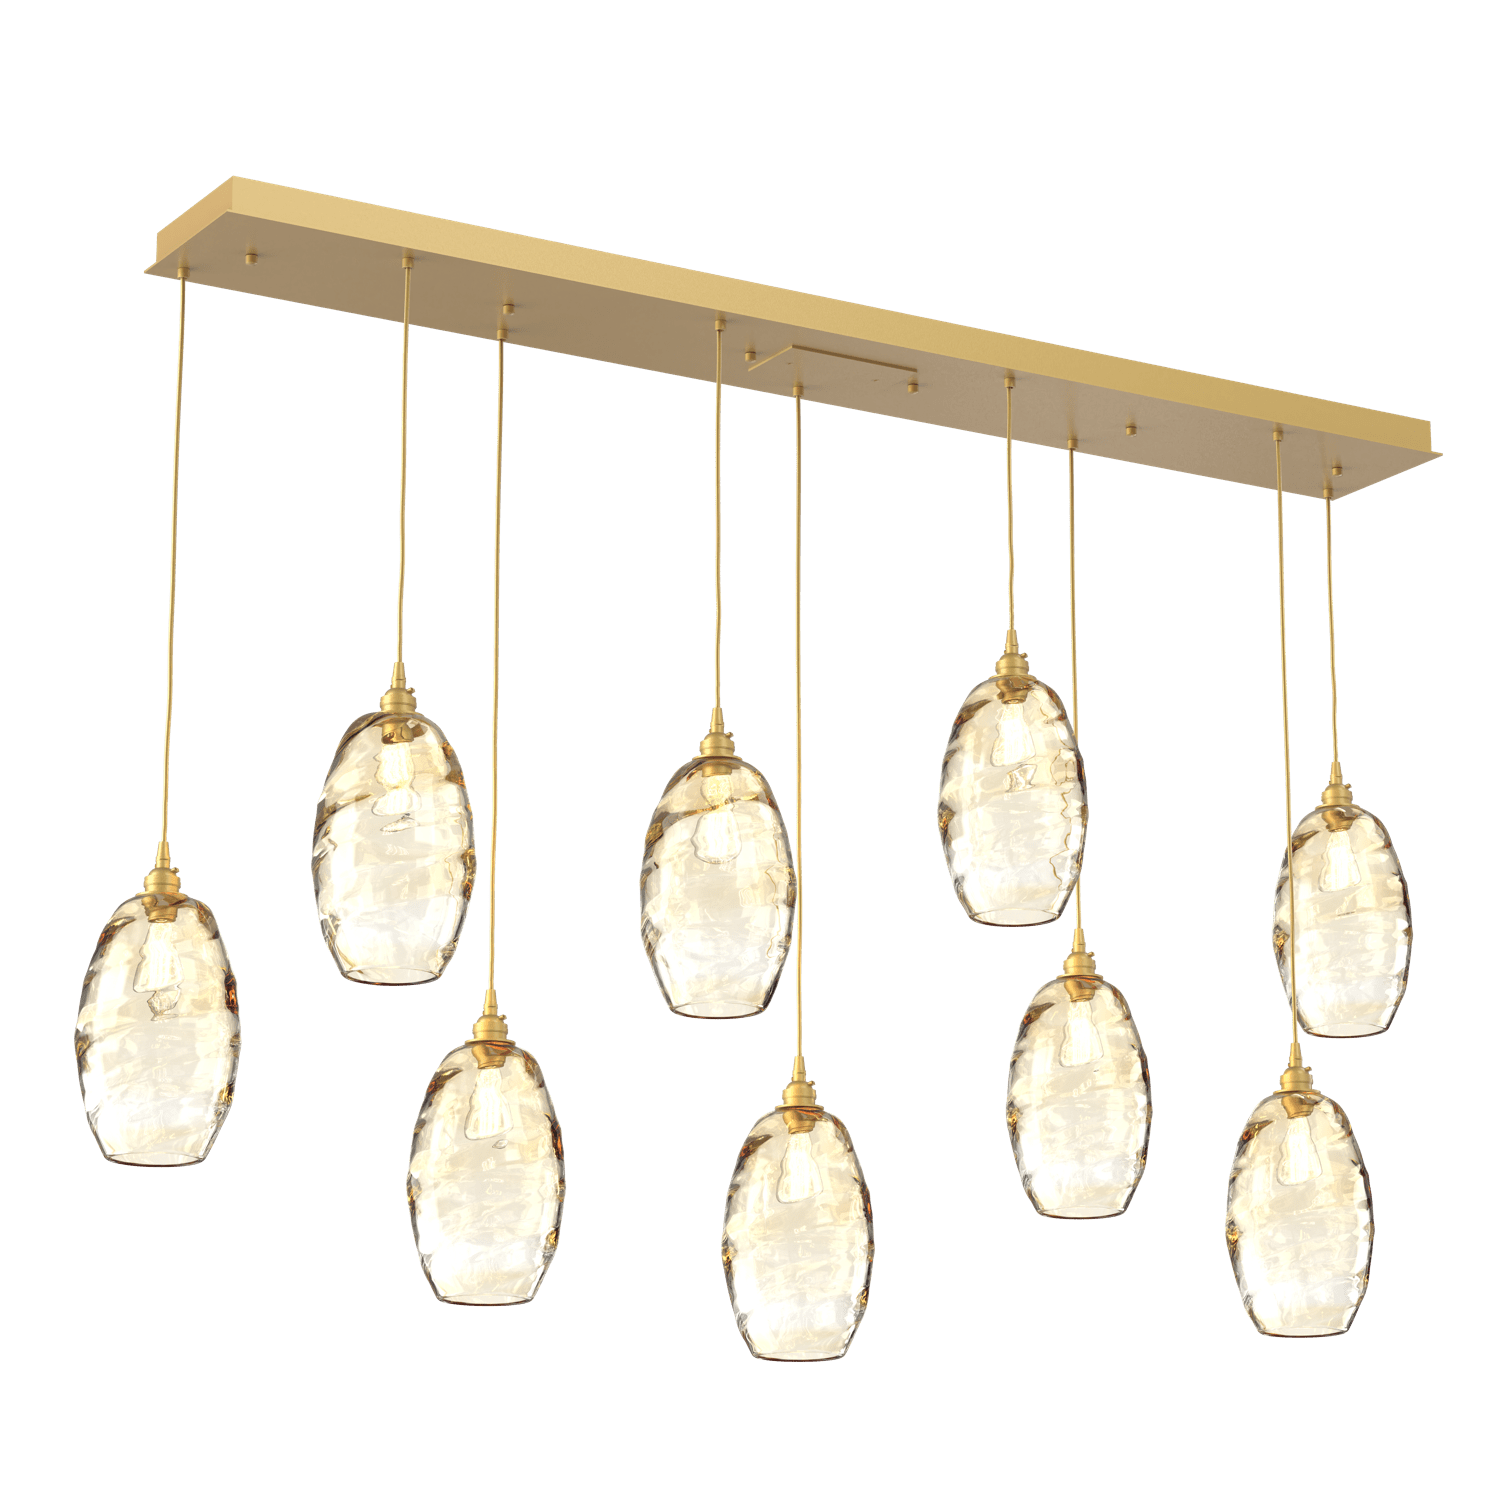 PLB0035-09-GB-OA-Hammerton-Studio-Optic-Blown-Glass-Elisse-9-light-linear-pendant-chandelier-with-gilded-brass-finish-and-optic-amber-blown-glass-shades-and-incandescent-lamping